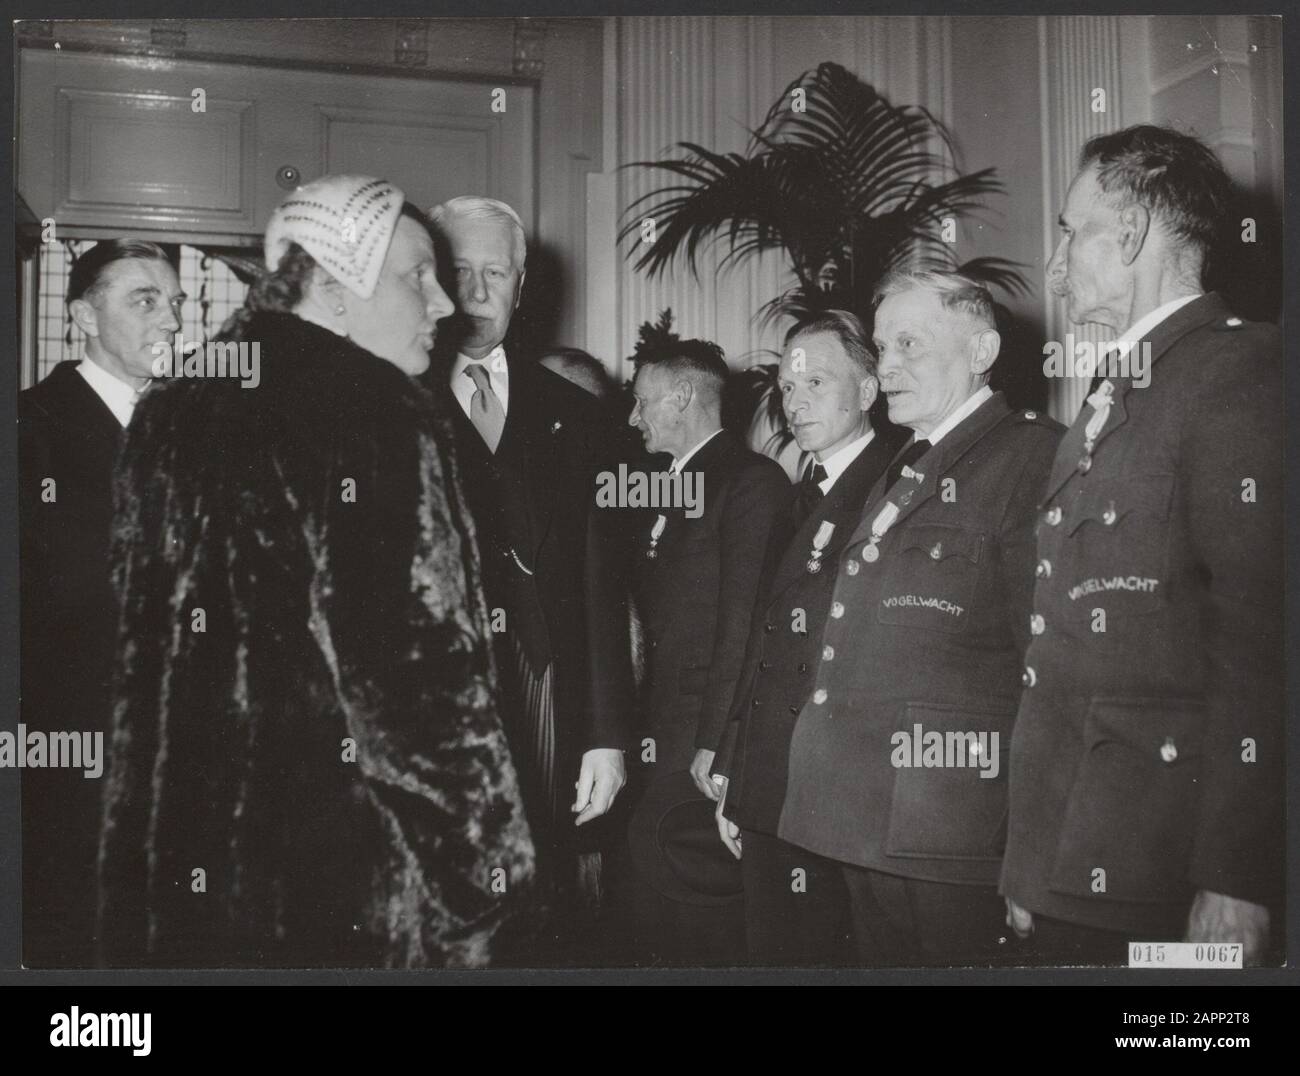 royal house, commemorations, environmental management, Juliana, queen, Steyn, J.A. Date: March 17, 1956 Location: Amsterdam, Noord-Holland Keywords: commemorations, royal house, environmental management Name: Juliana, queen, Steyn, J.A. Institution name: Concertgebouw Stock Photo